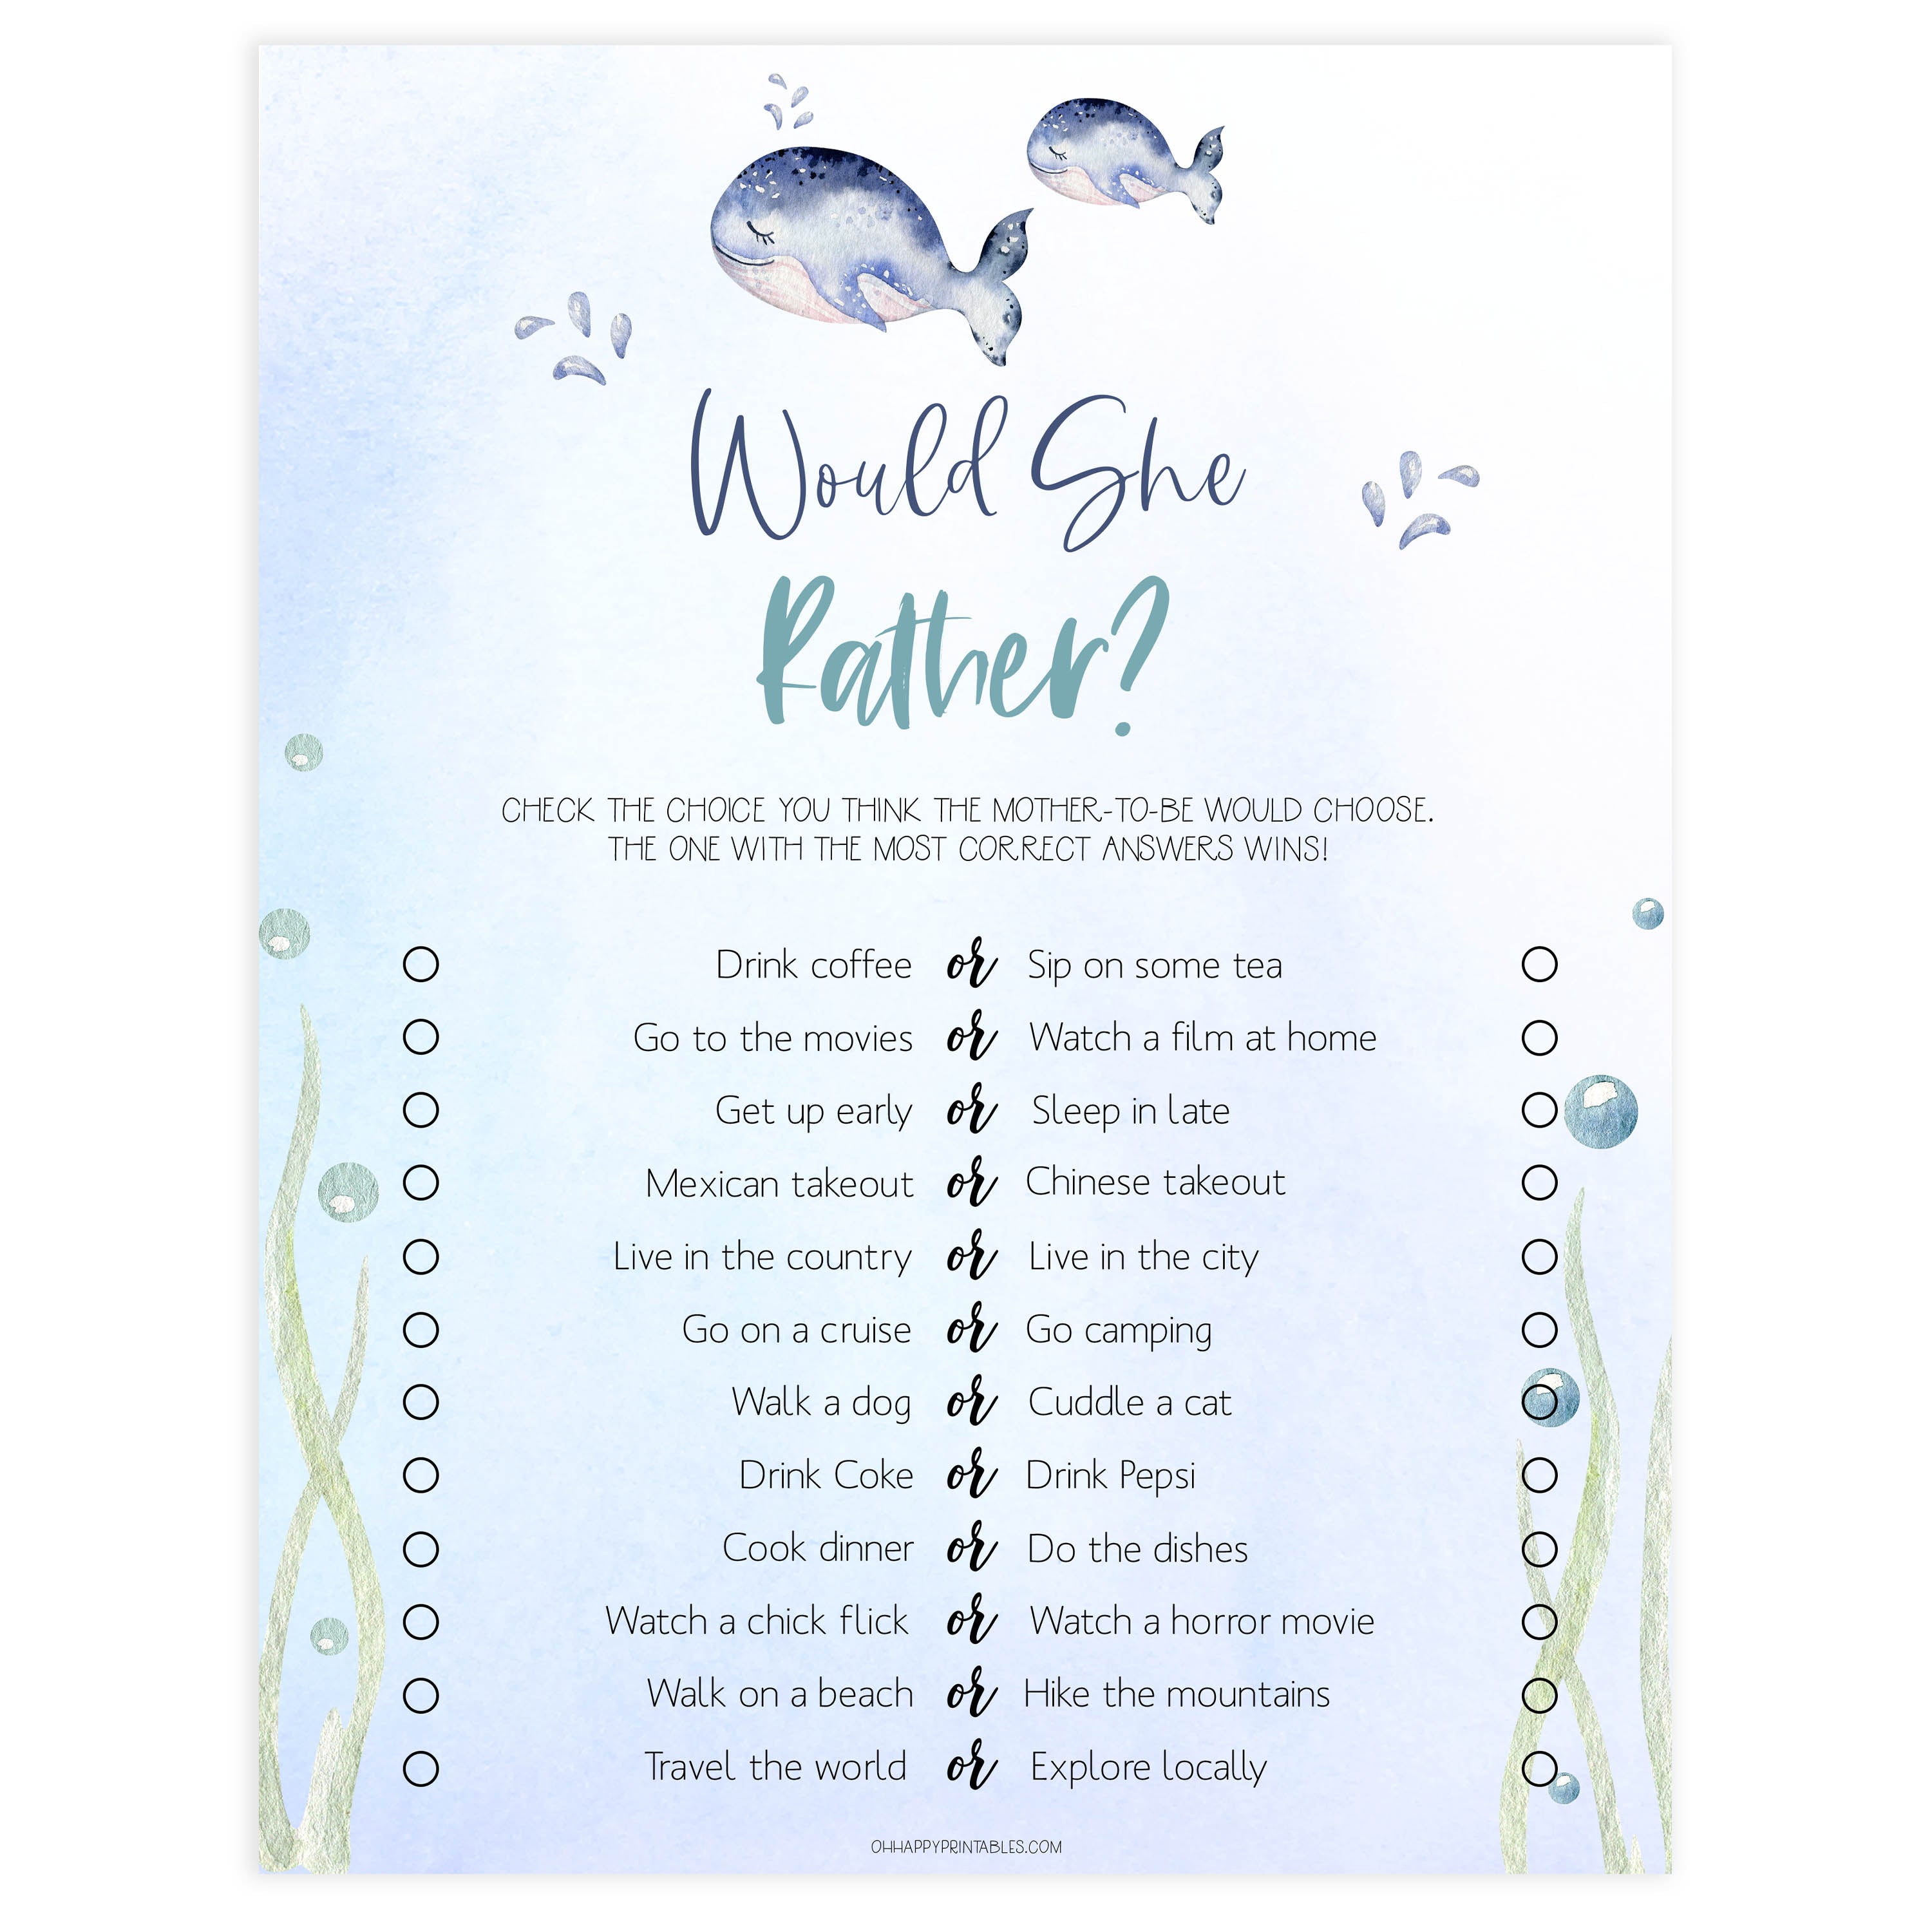 would she rather baby game, Printable baby shower games, whale baby games, baby shower games, fun baby shower ideas, top baby shower ideas, whale baby shower, baby shower games, fun whale baby shower ideas